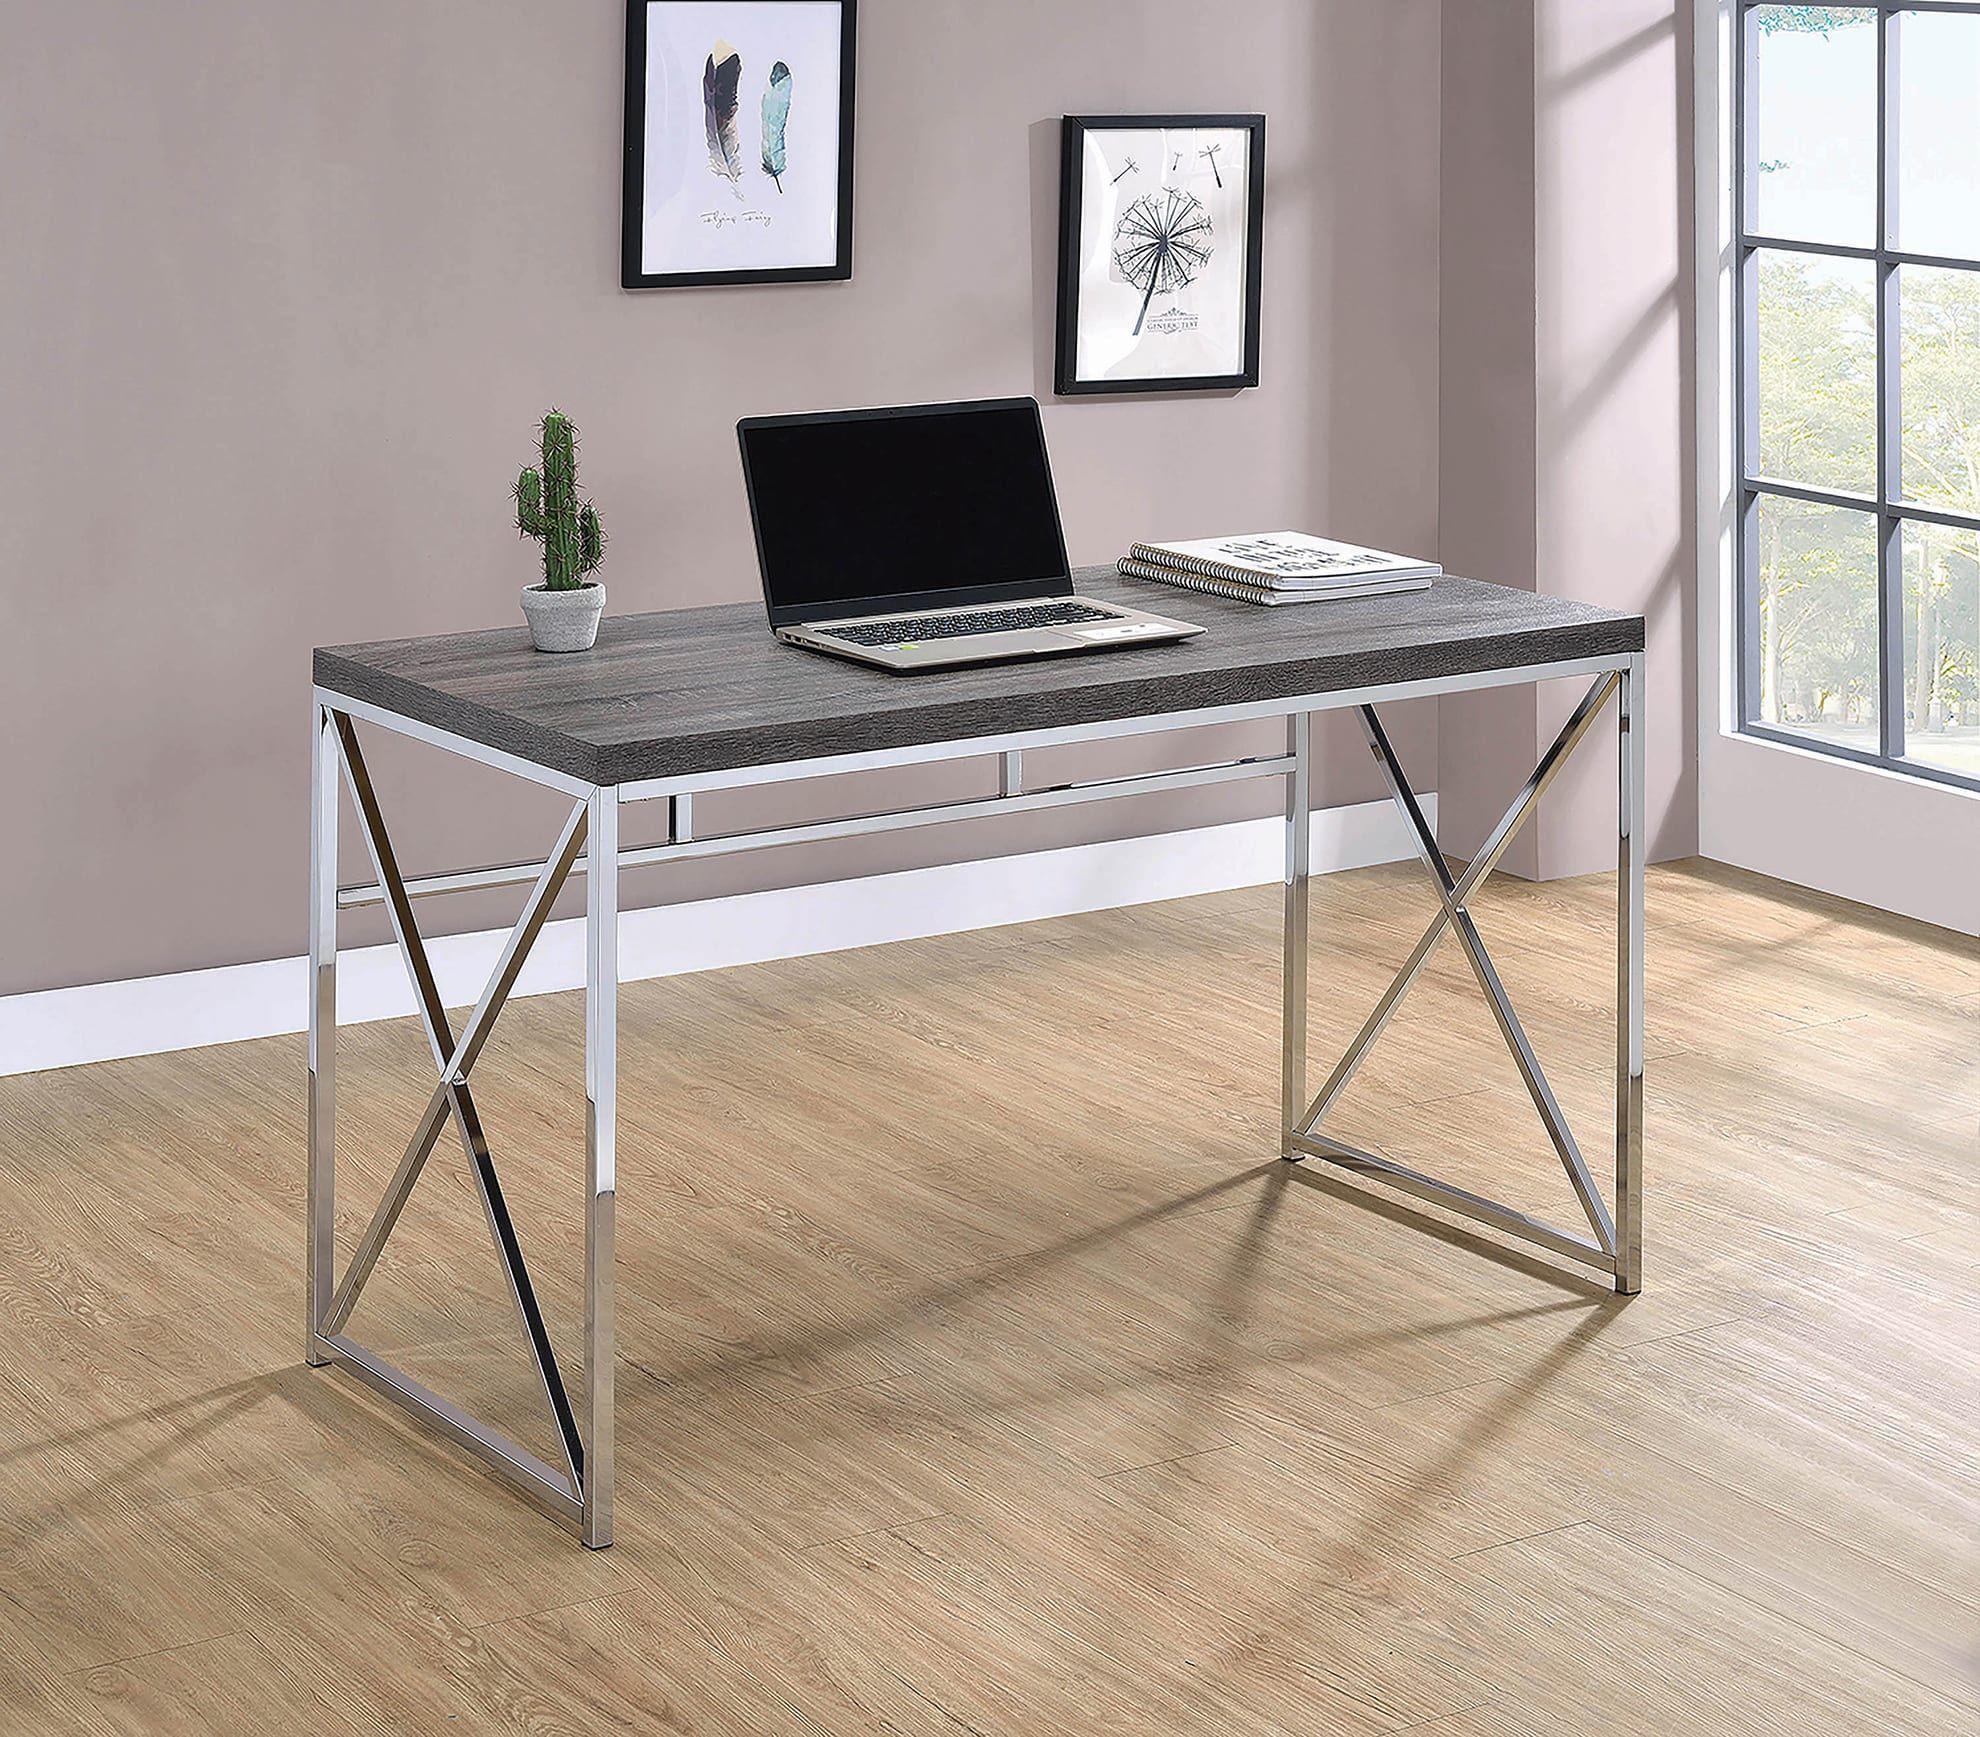 Transitional Weathered Grey Writing Desk | Quality Furniture At In Gray Wash Wood Writing Desks (View 3 of 15)